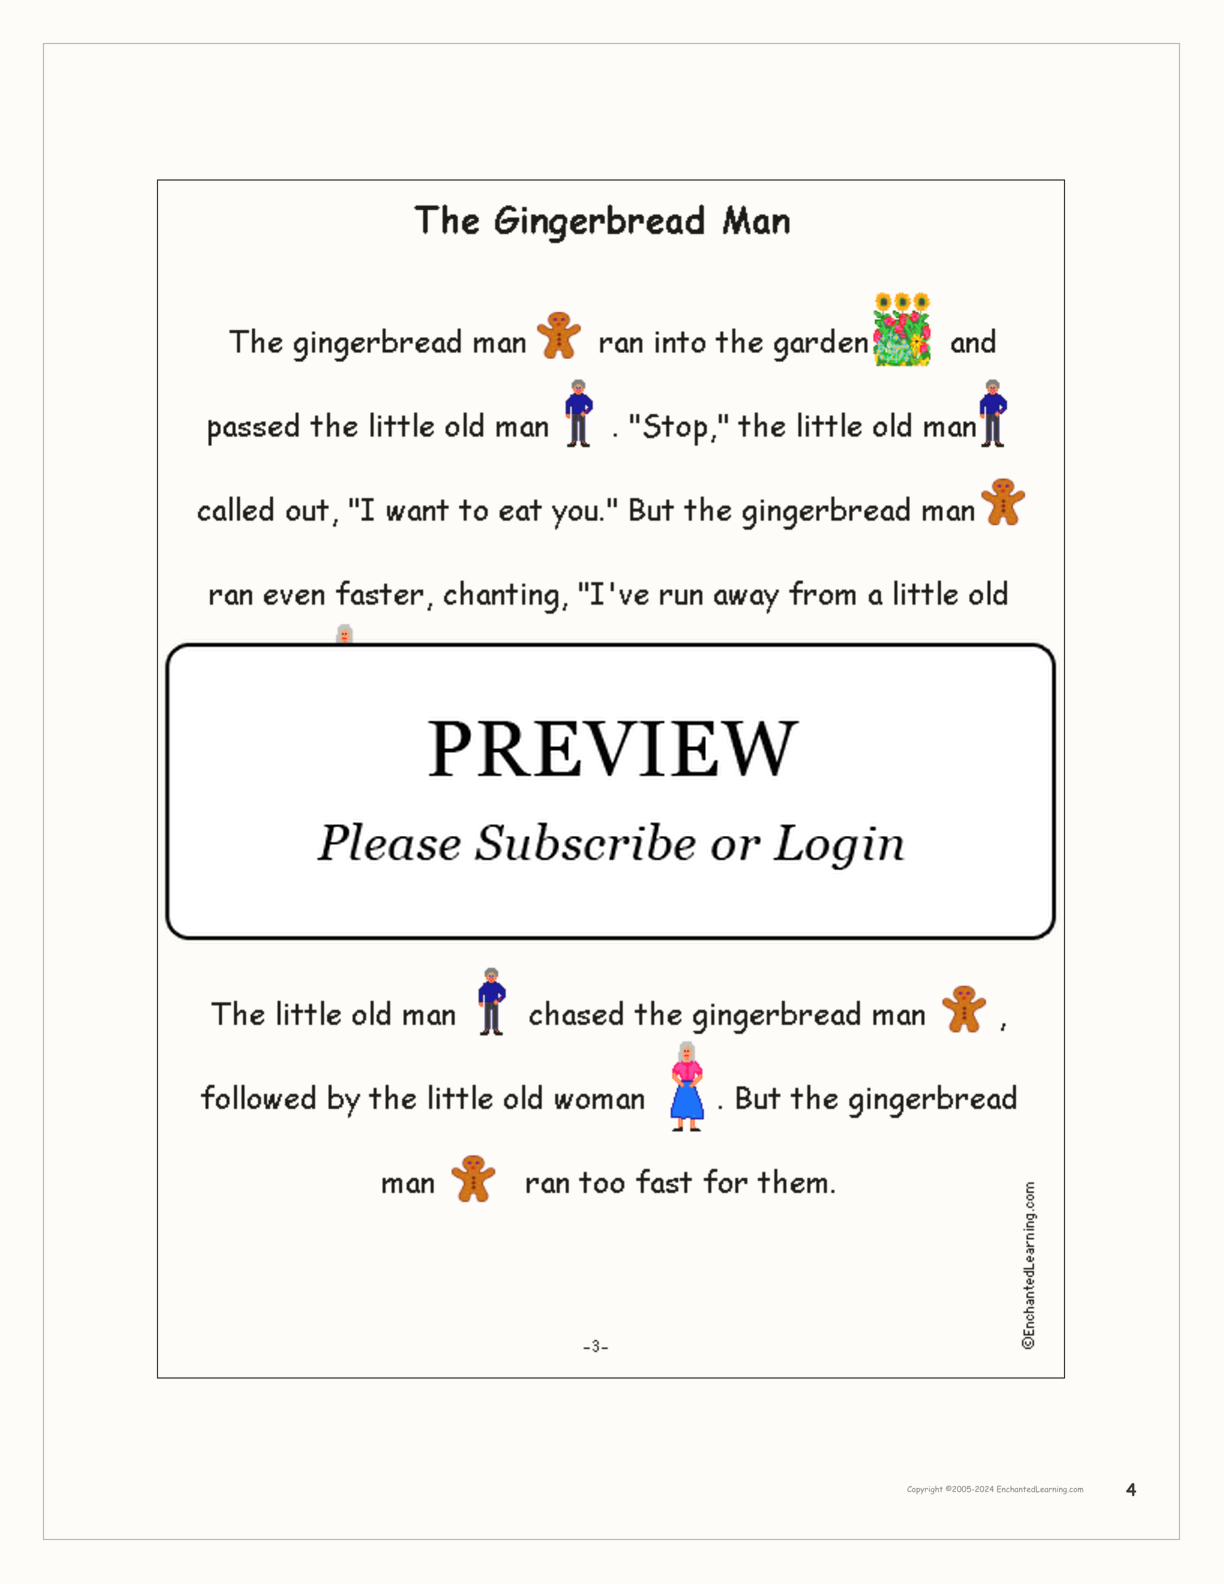 'The Gingerbread Man' Book interactive printout page 4